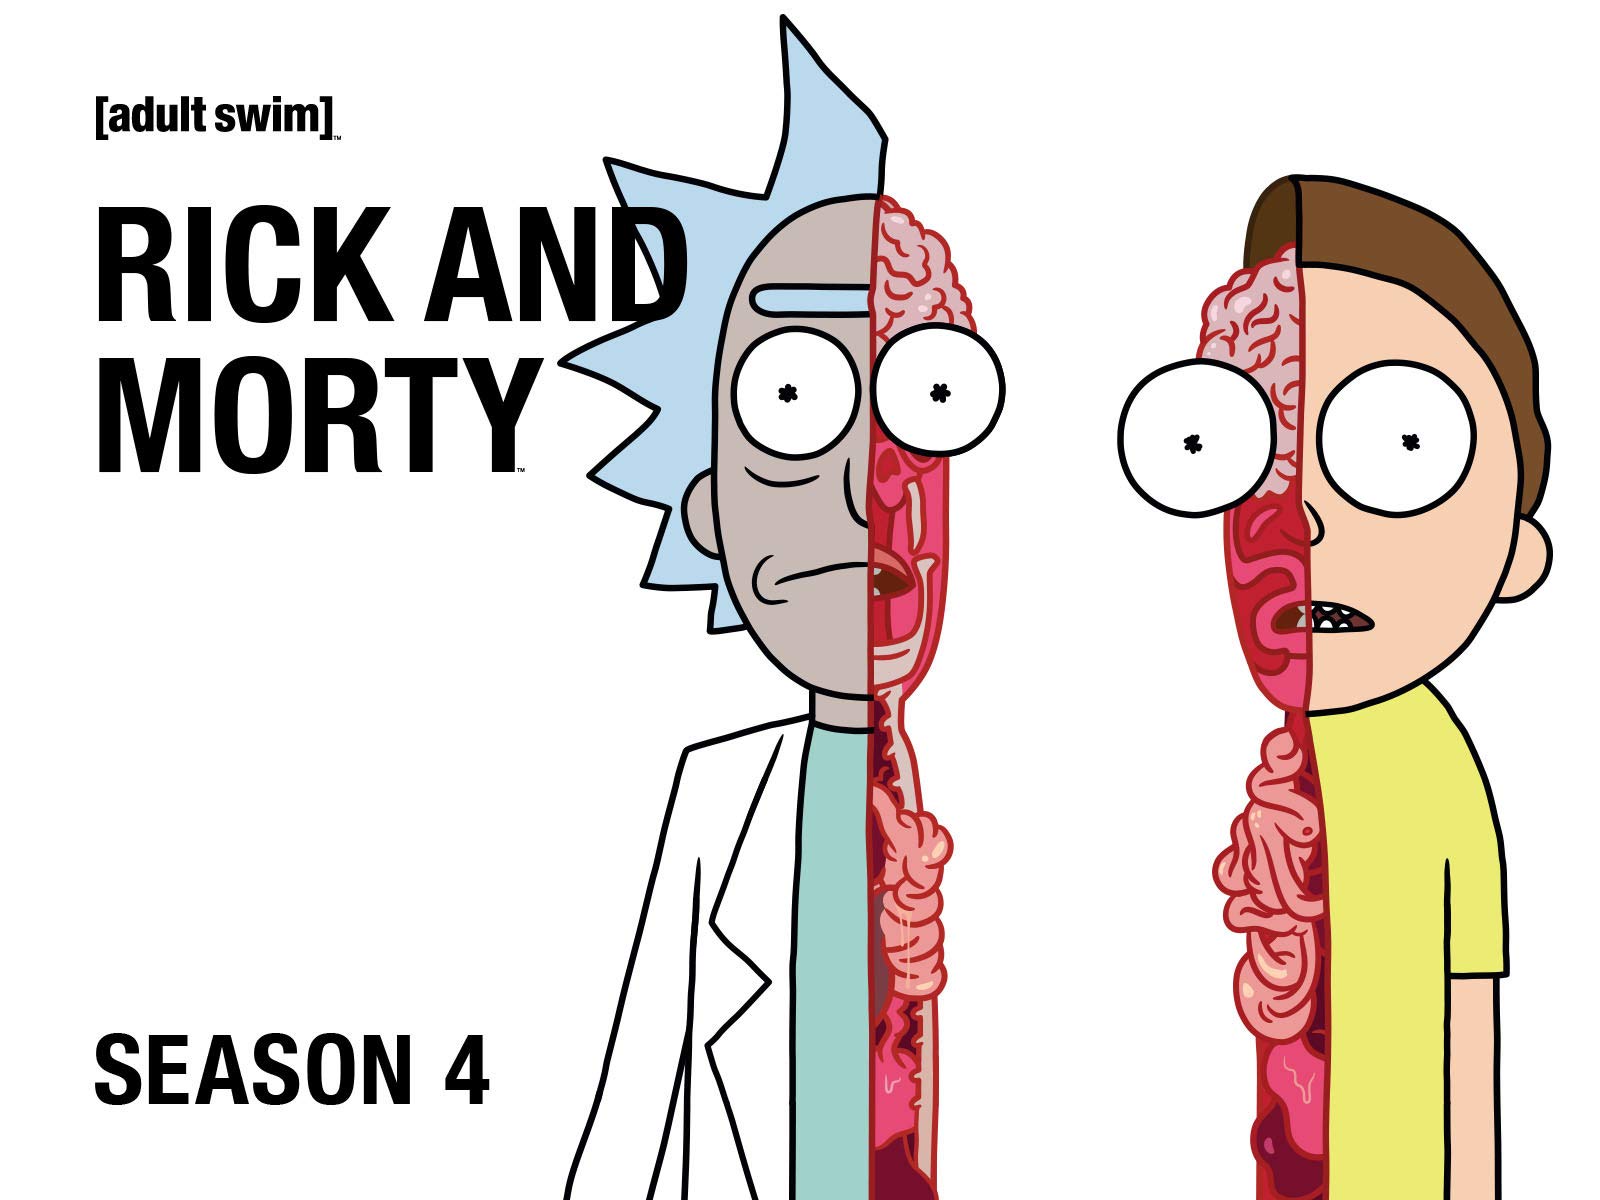 What Has Been In The Audience Most After Rick And Morty Season 4 Ended?